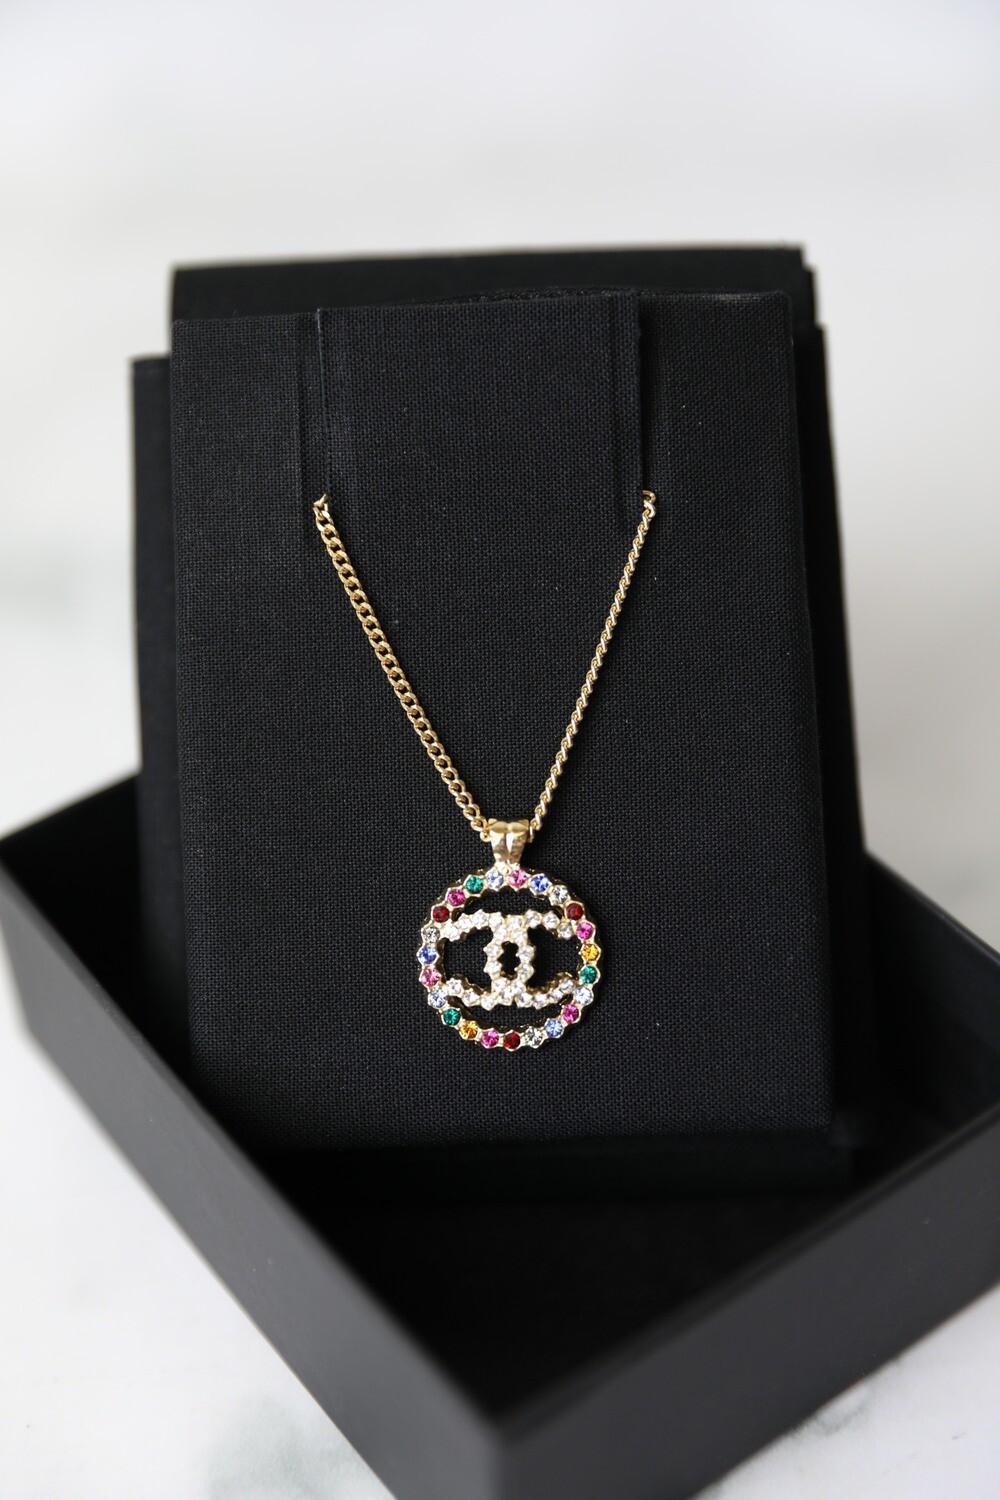 Pre-Owned Chanel Crystal Necklace - Vintage CC Logo Gold Choker Pendant  Charm Rhinestone